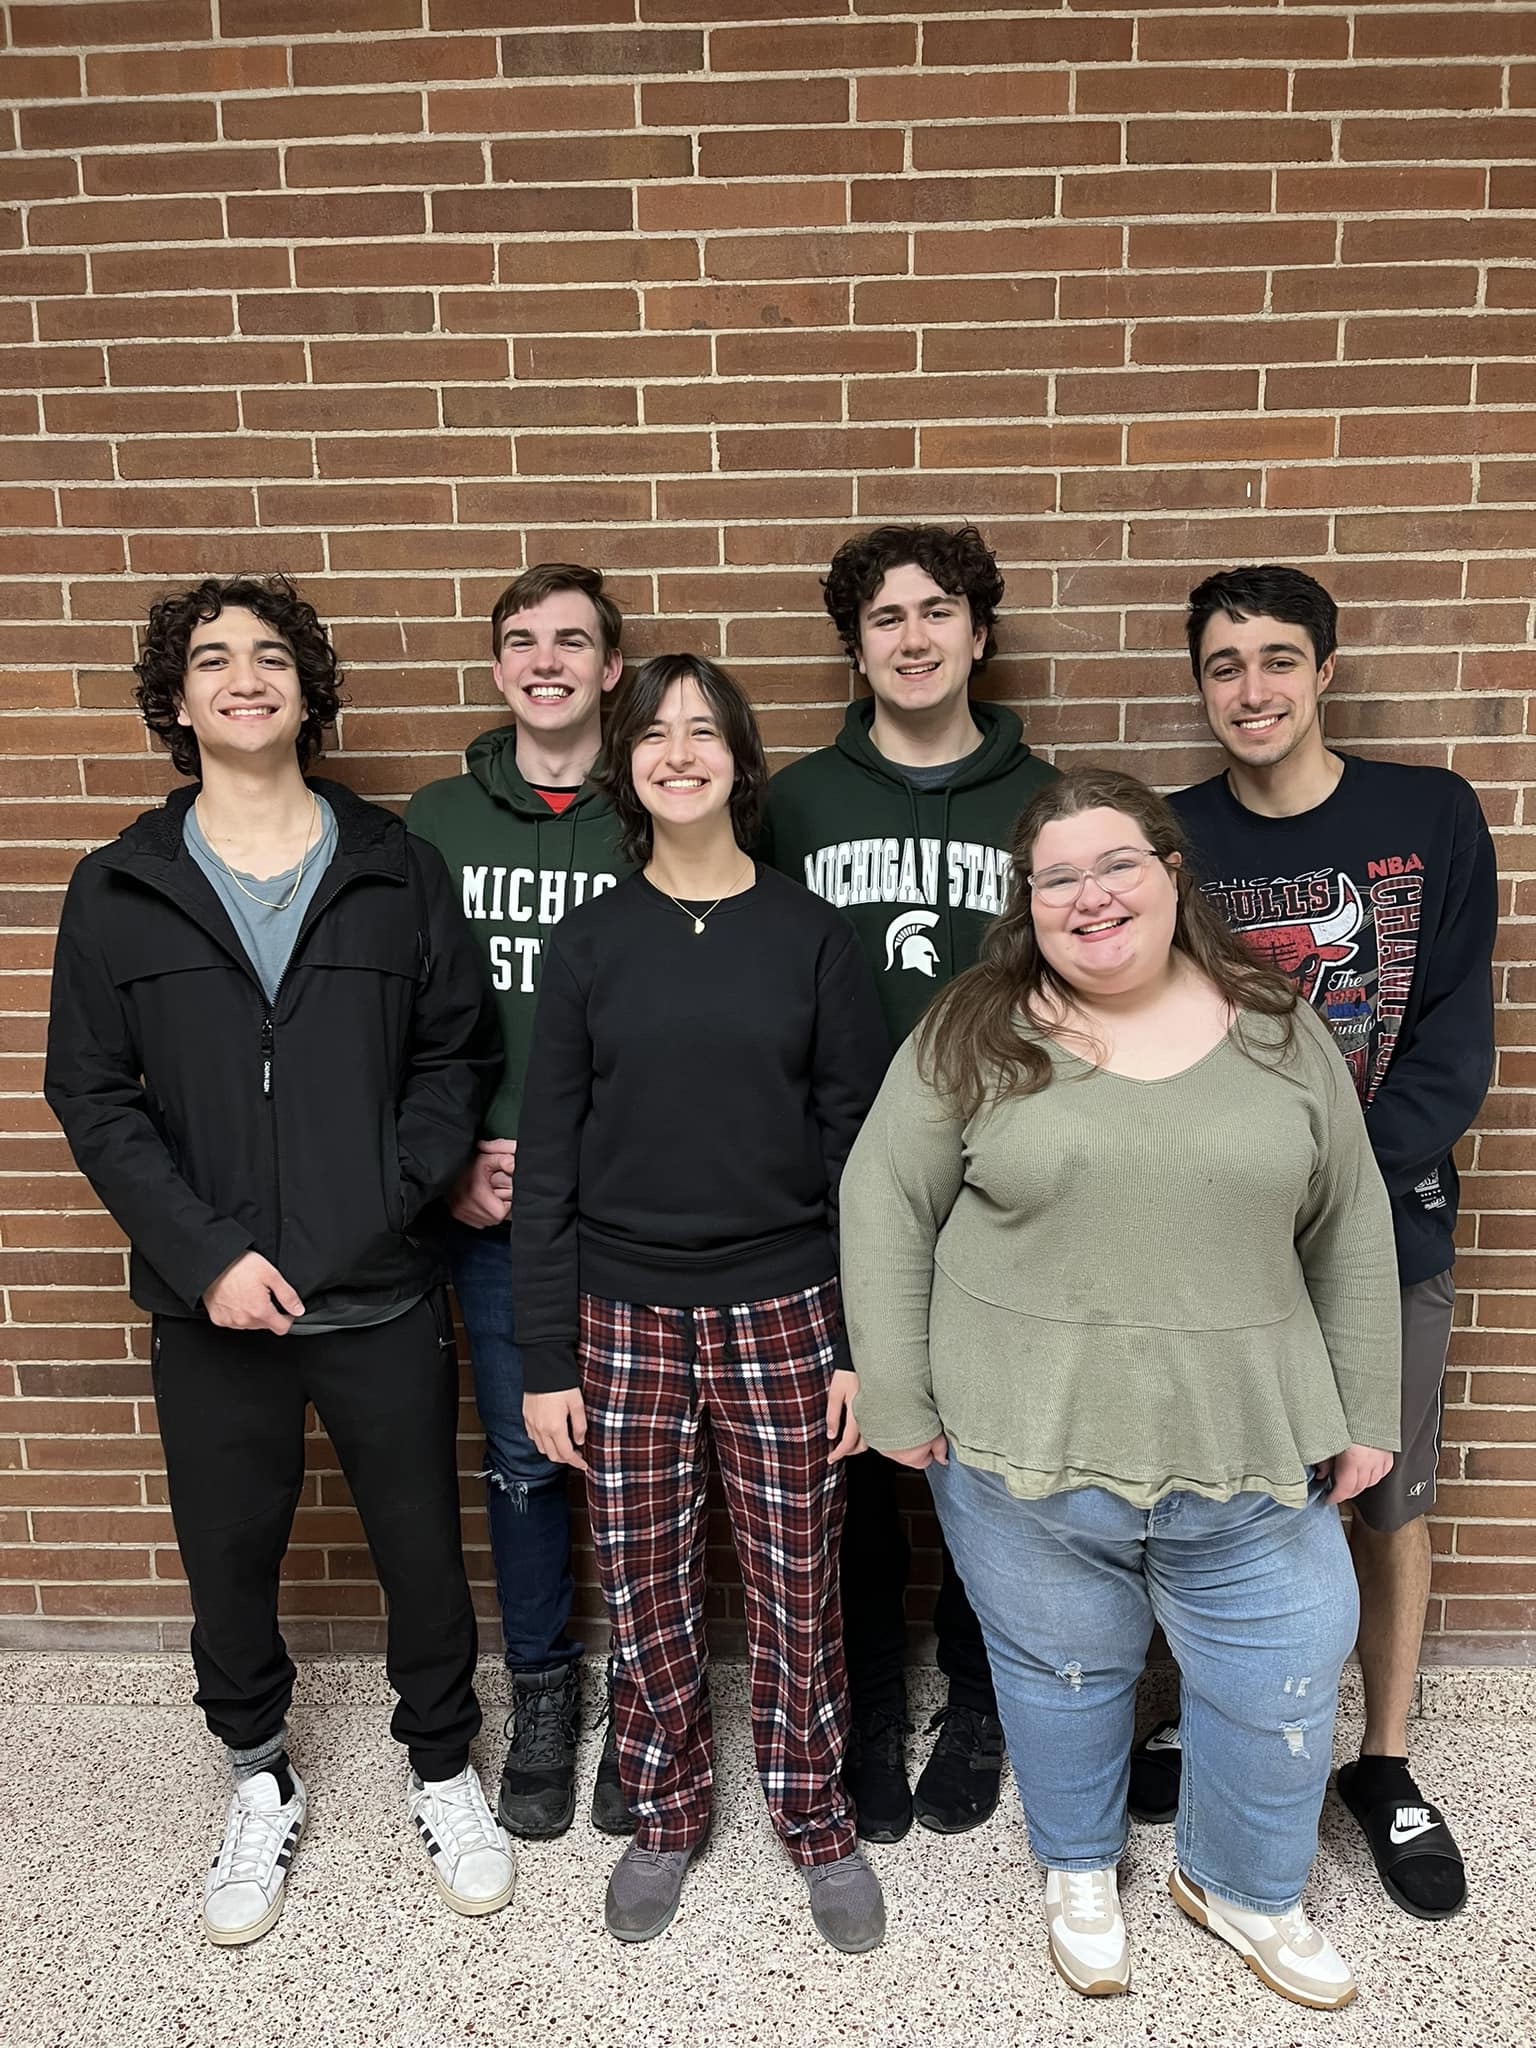 The MSU Debate competitors who will be competing at the National Debate Tournament (from left to right): Ephraim Bennett, David Koster, Joanna Gusis, Tony Miklovis, Nate Glancy and PIper Meloche